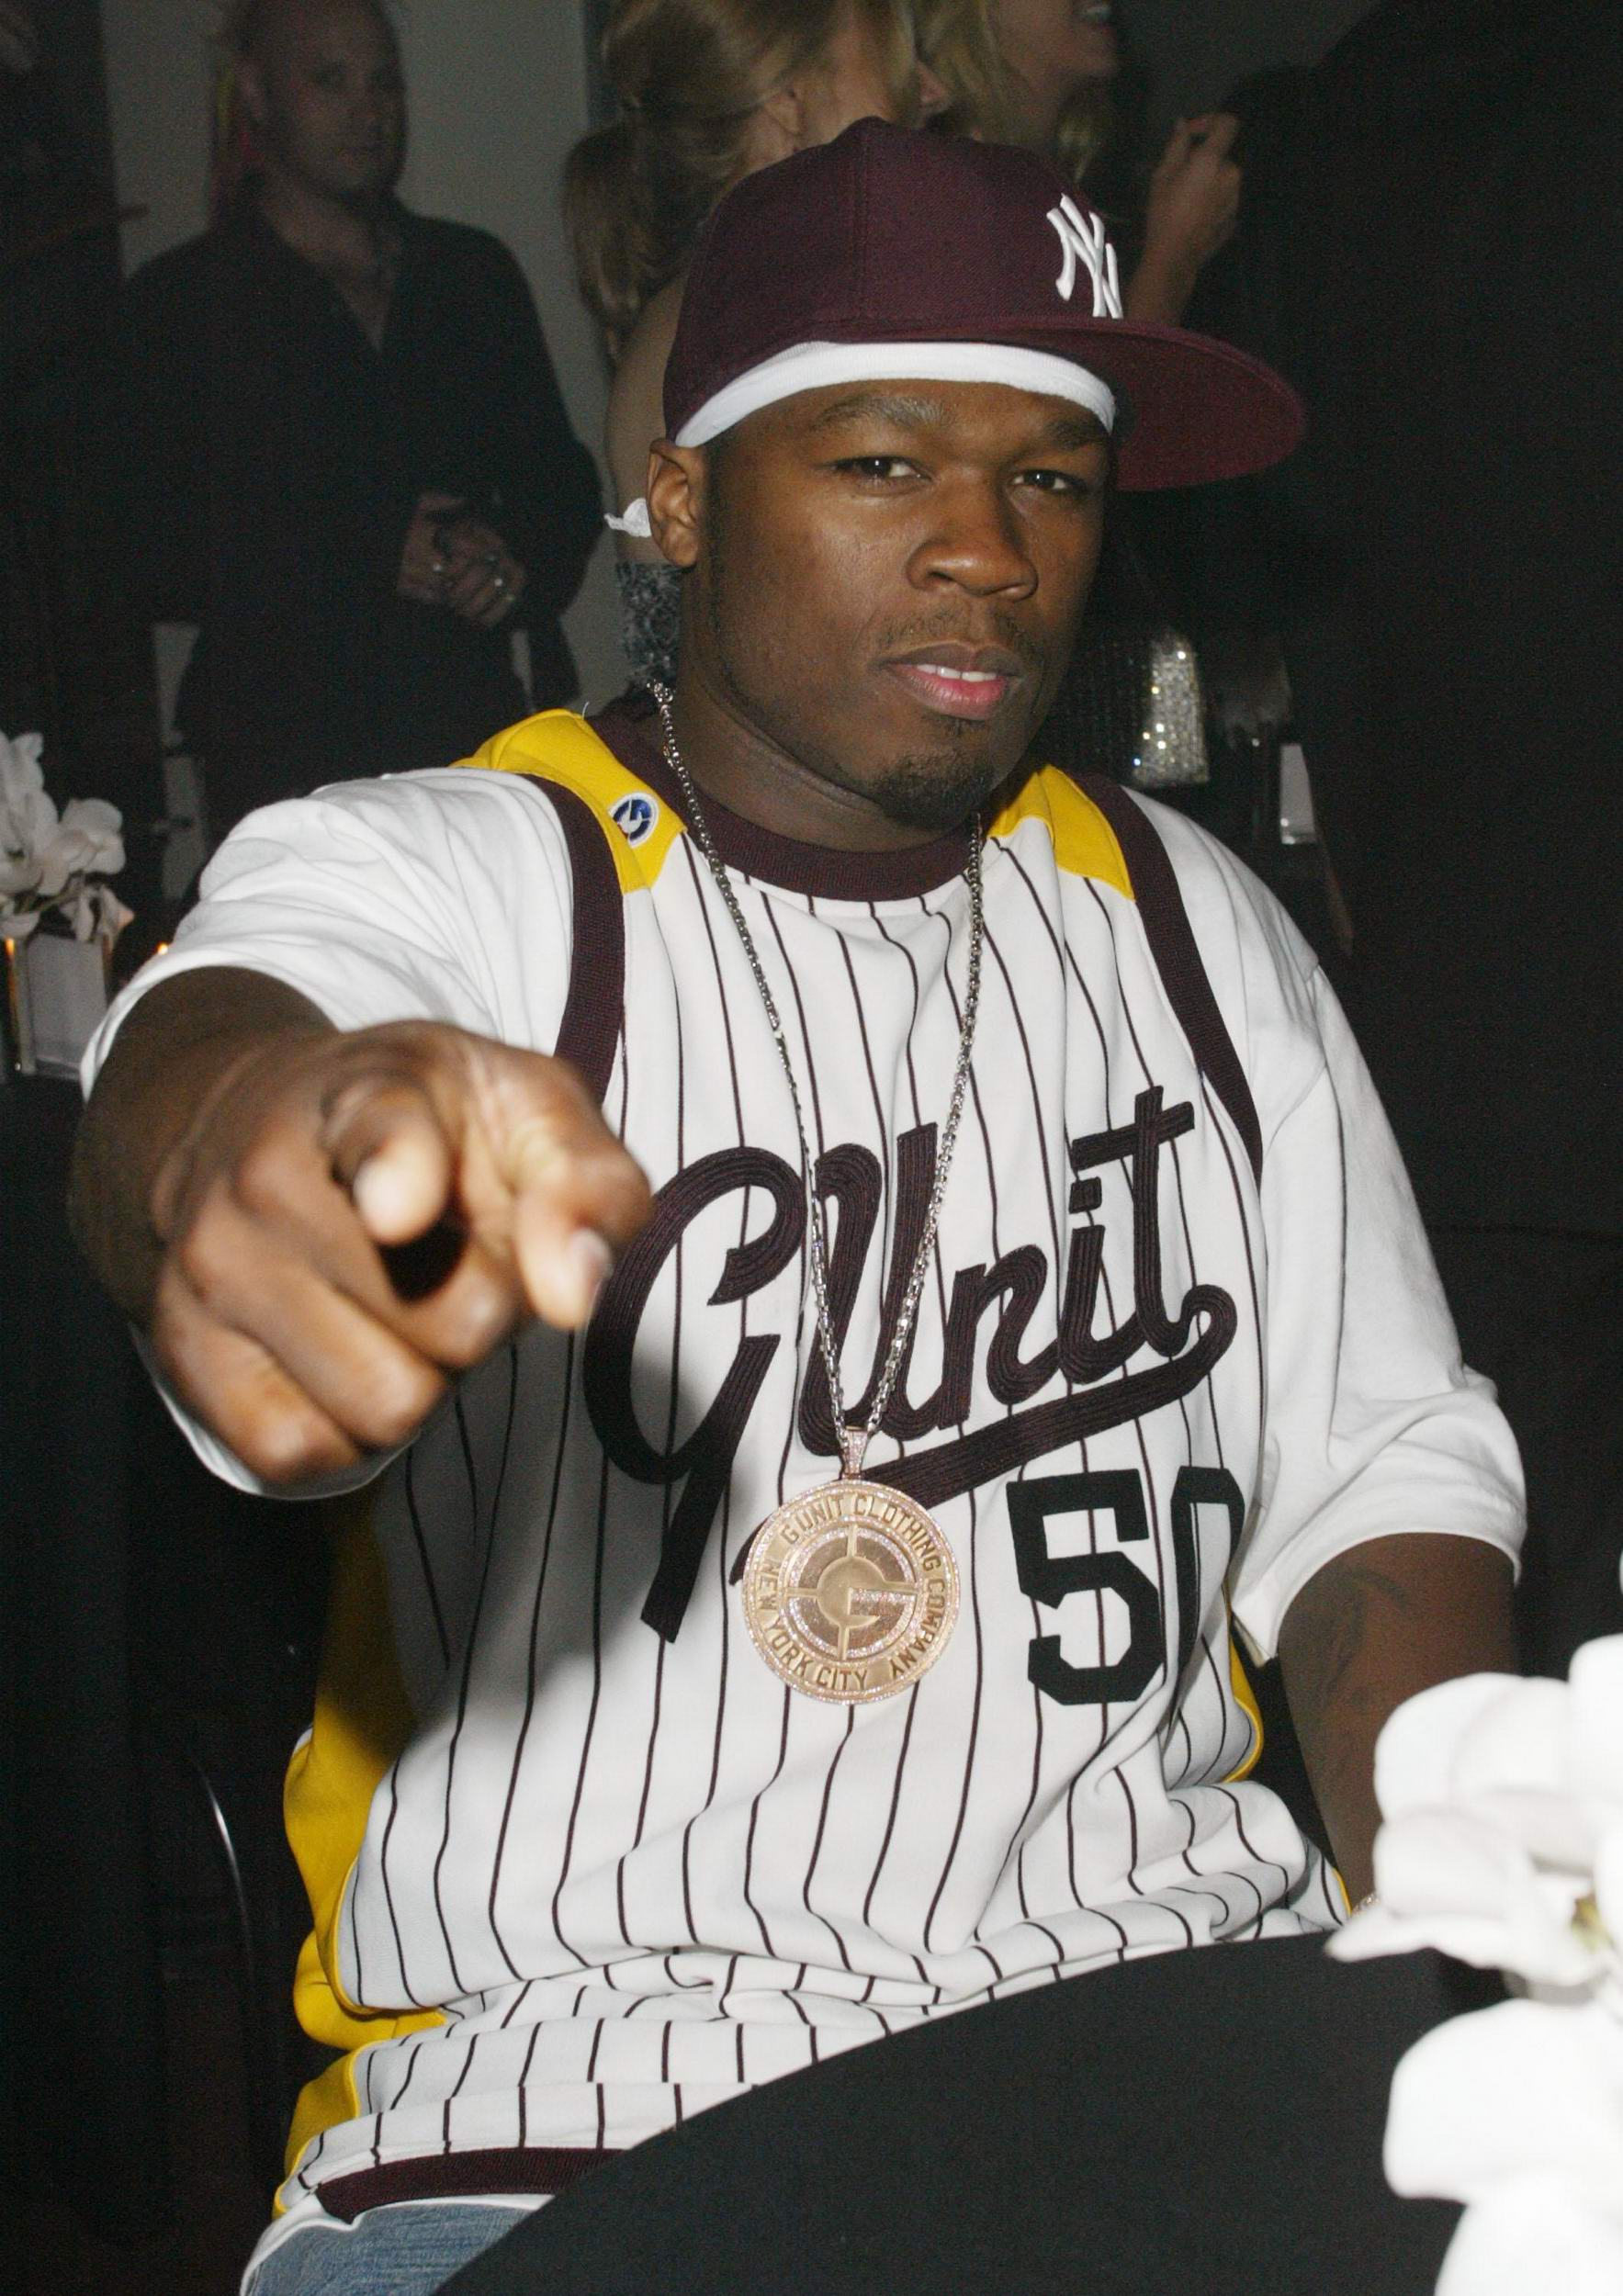 50cent photo 54 of 90 pics, wallpaper - photo #114647 - ThePlace2